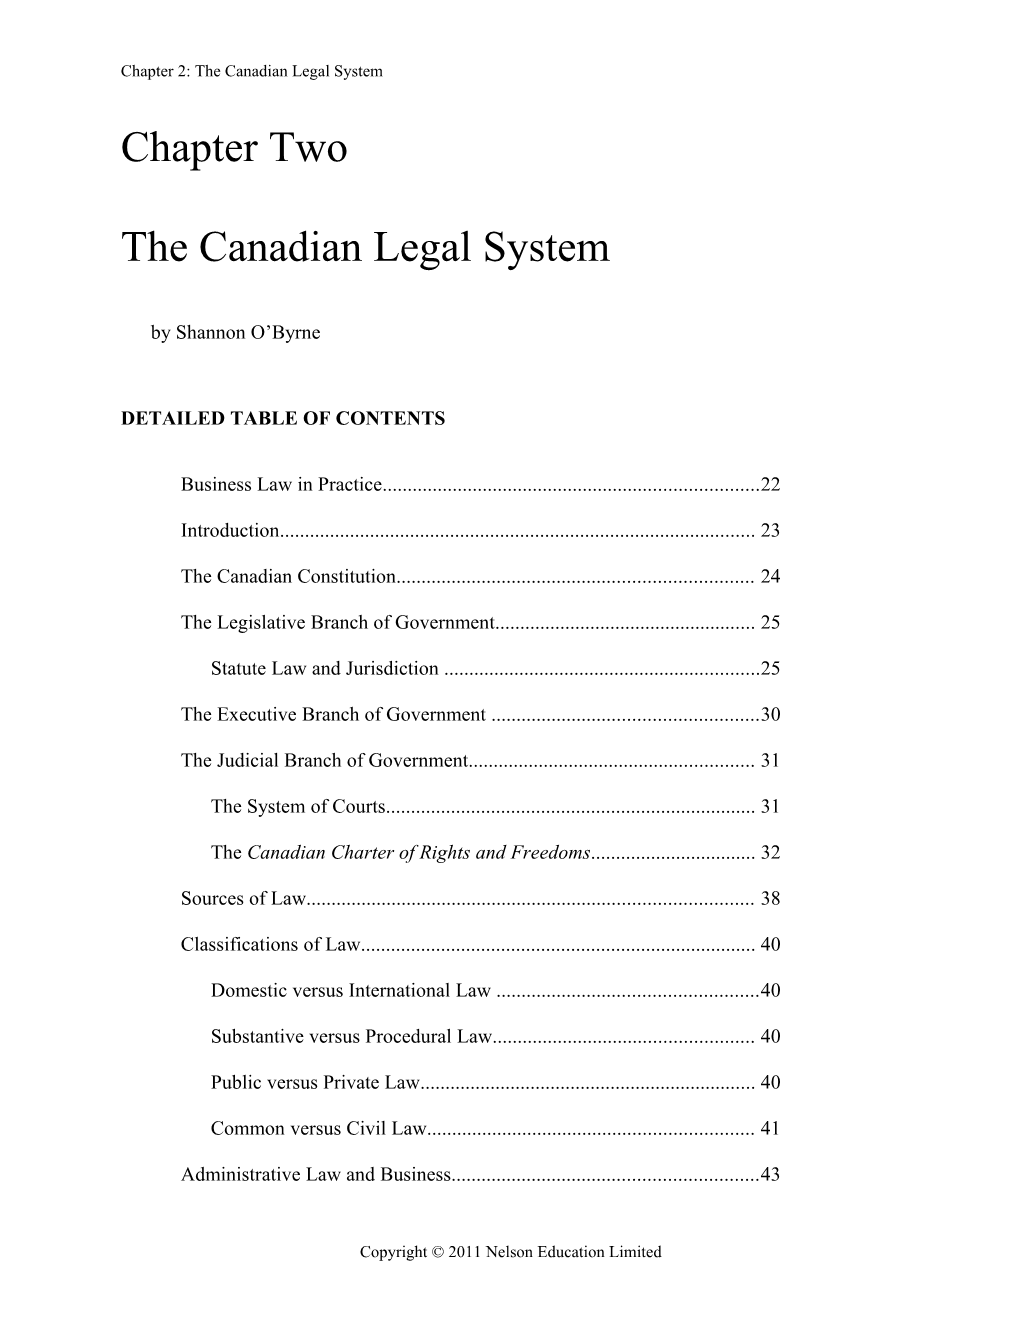 Chapter 2: the Canadian Legal System